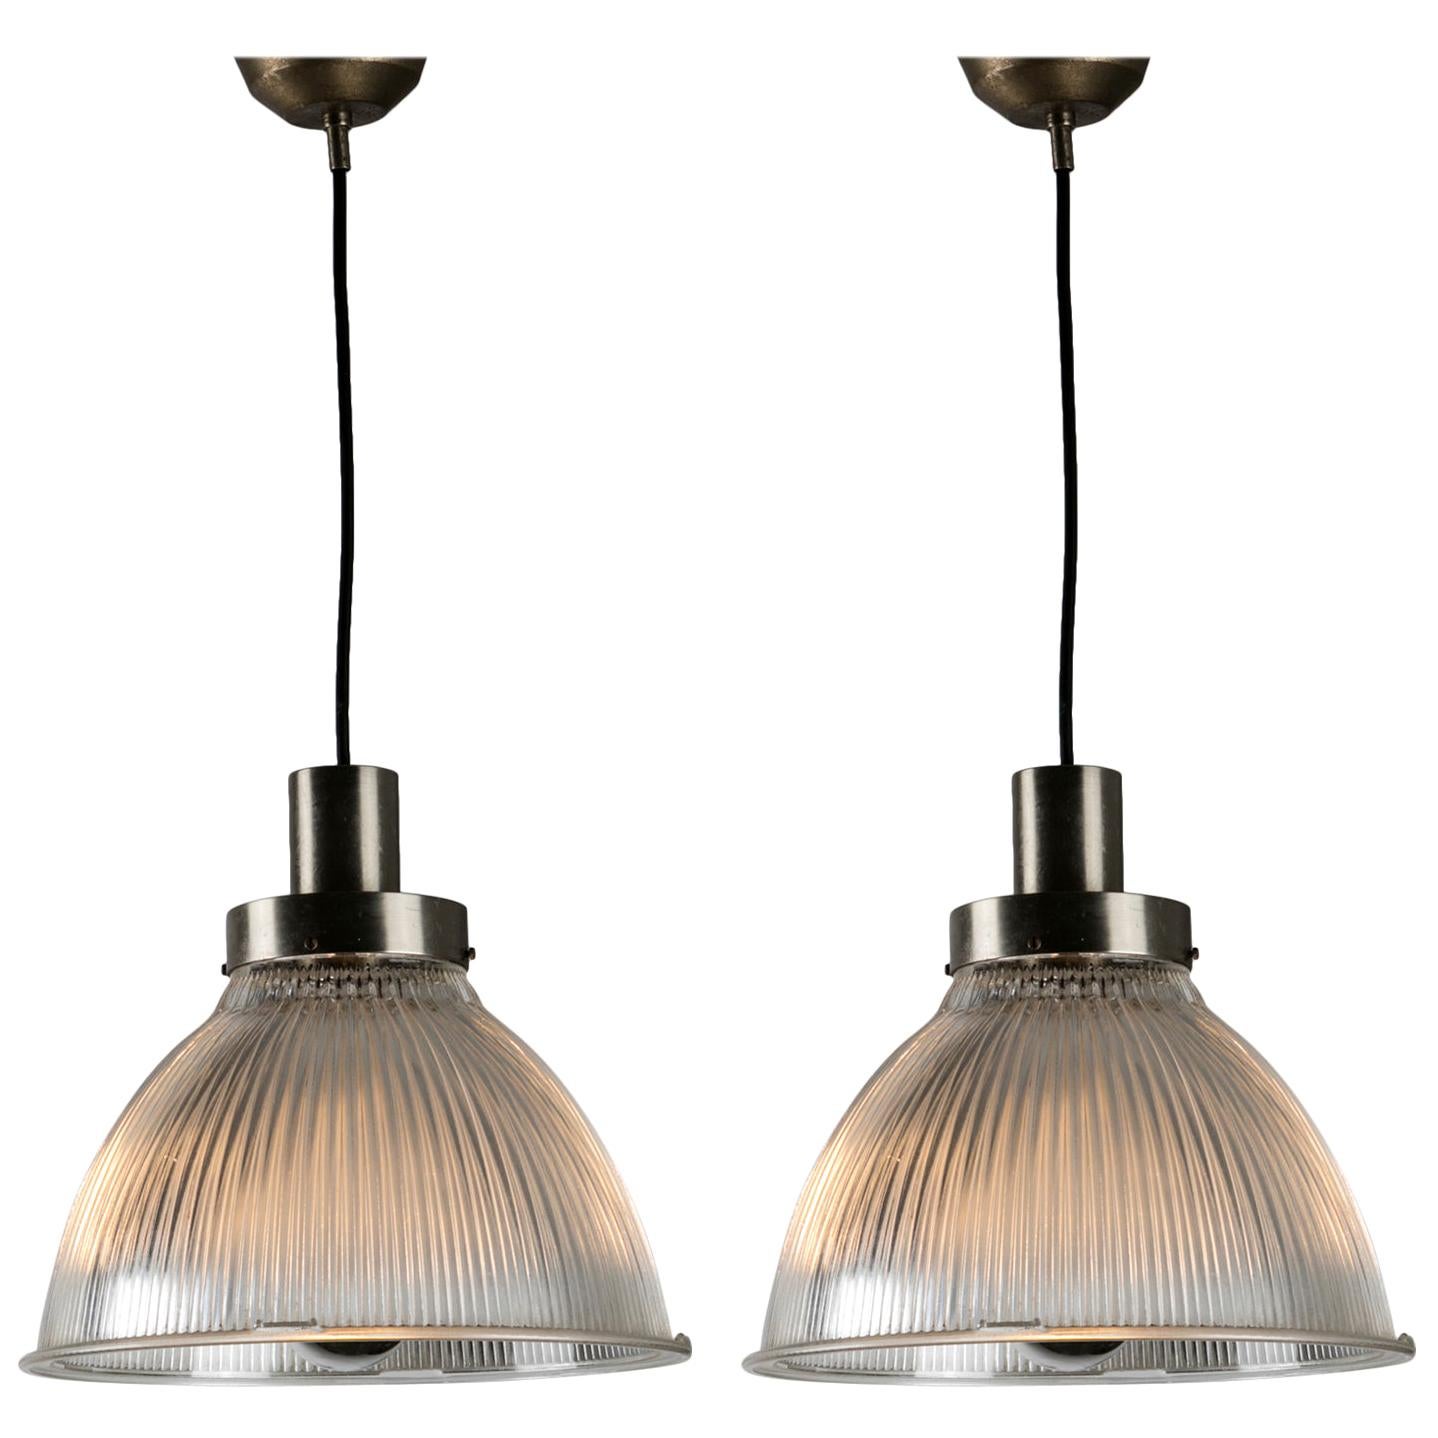 Set of Two Pendant Lamps in the style of B.B.P.R. for Artemide, Italy, 1950s